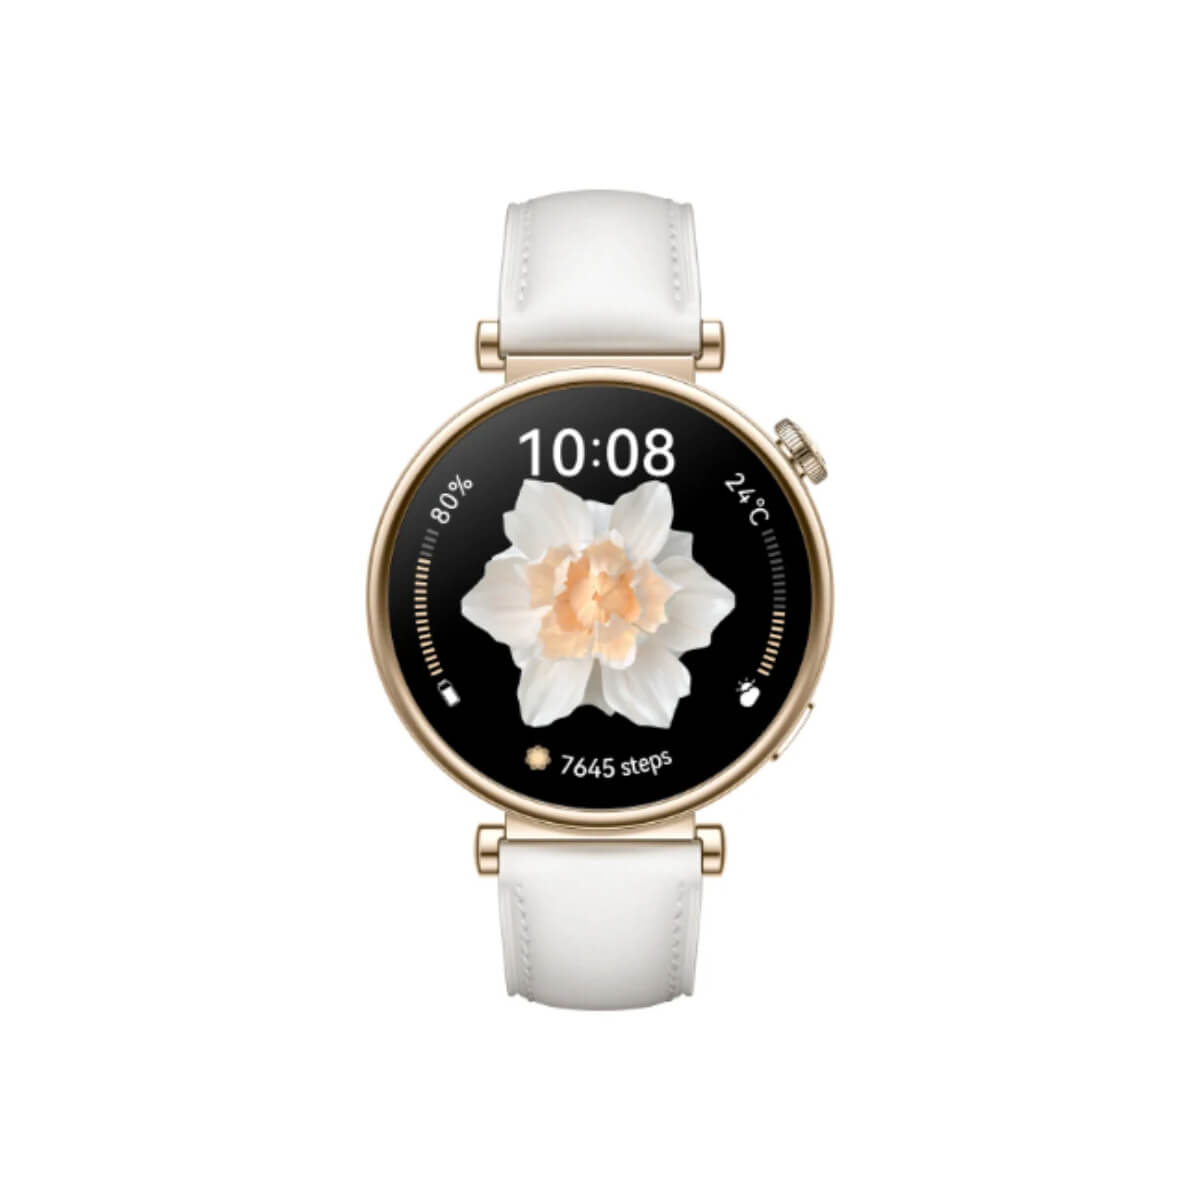 Hommtel GT4 Pro AMOLED Display Smartwatch Gold - Web Store